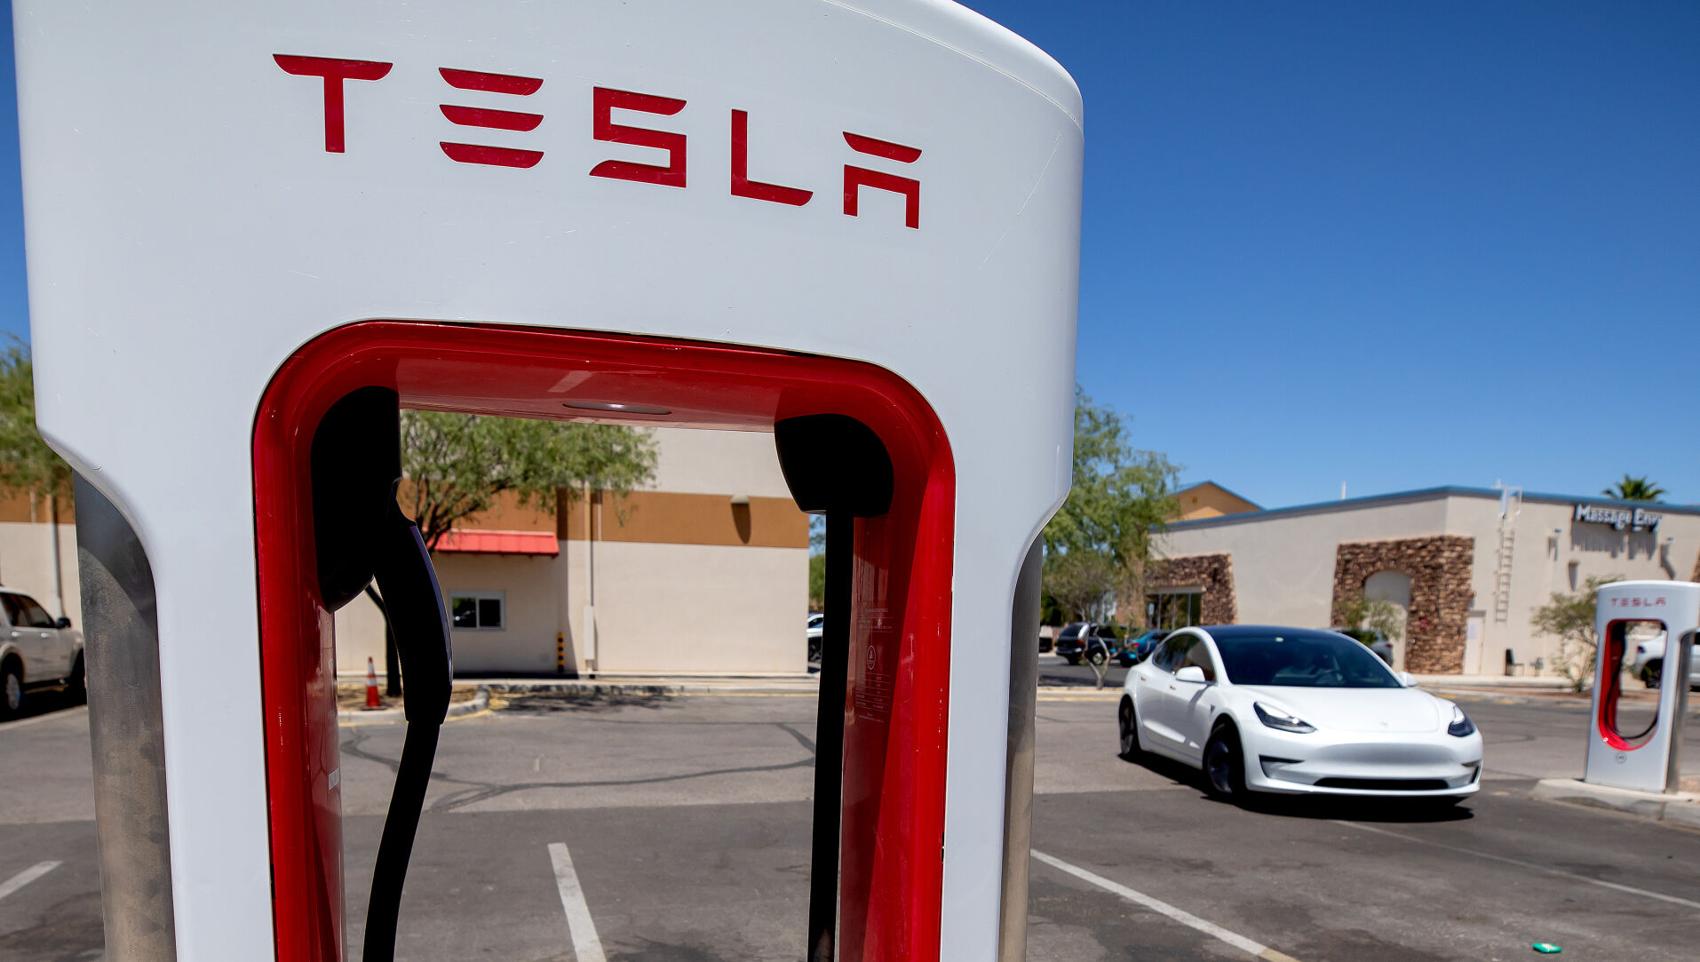 Tucson's proposed electric vehicle rules called too aggressive